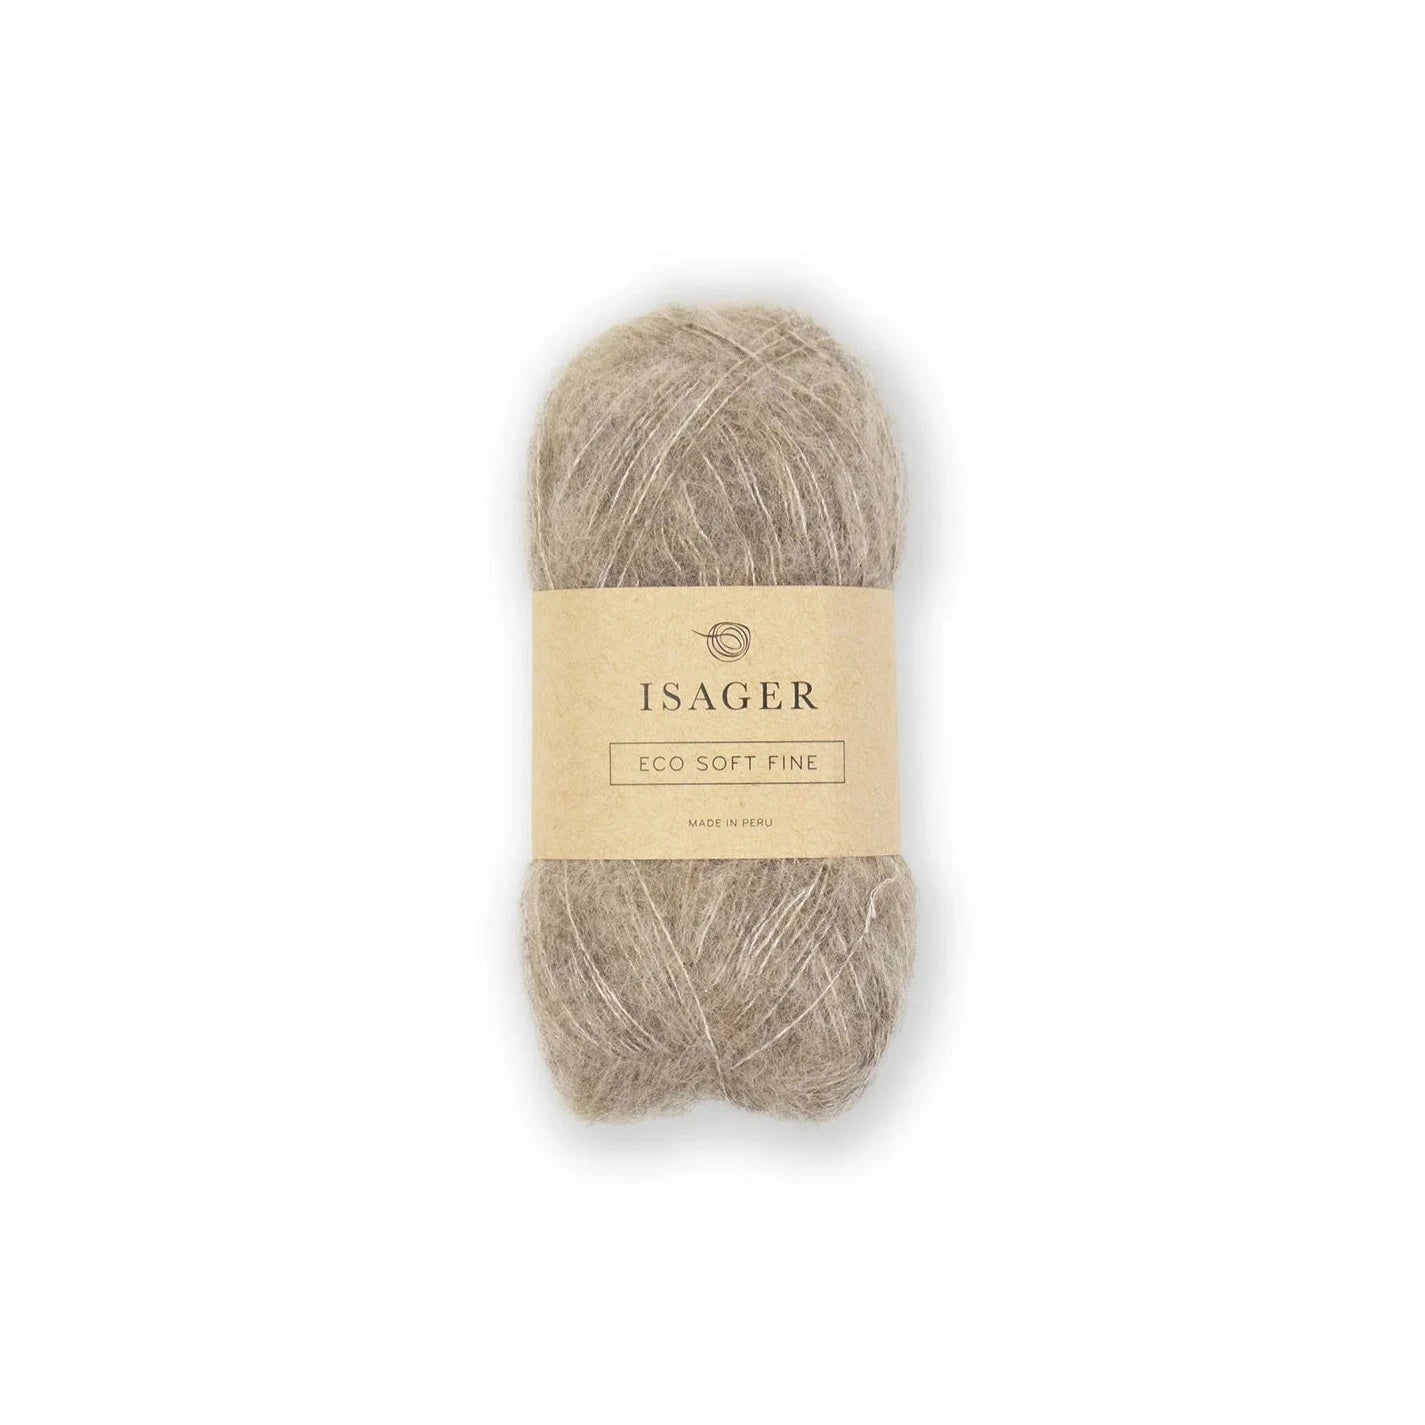 Isager Soft Fine - Isager - E6s - The Little Yarn Store